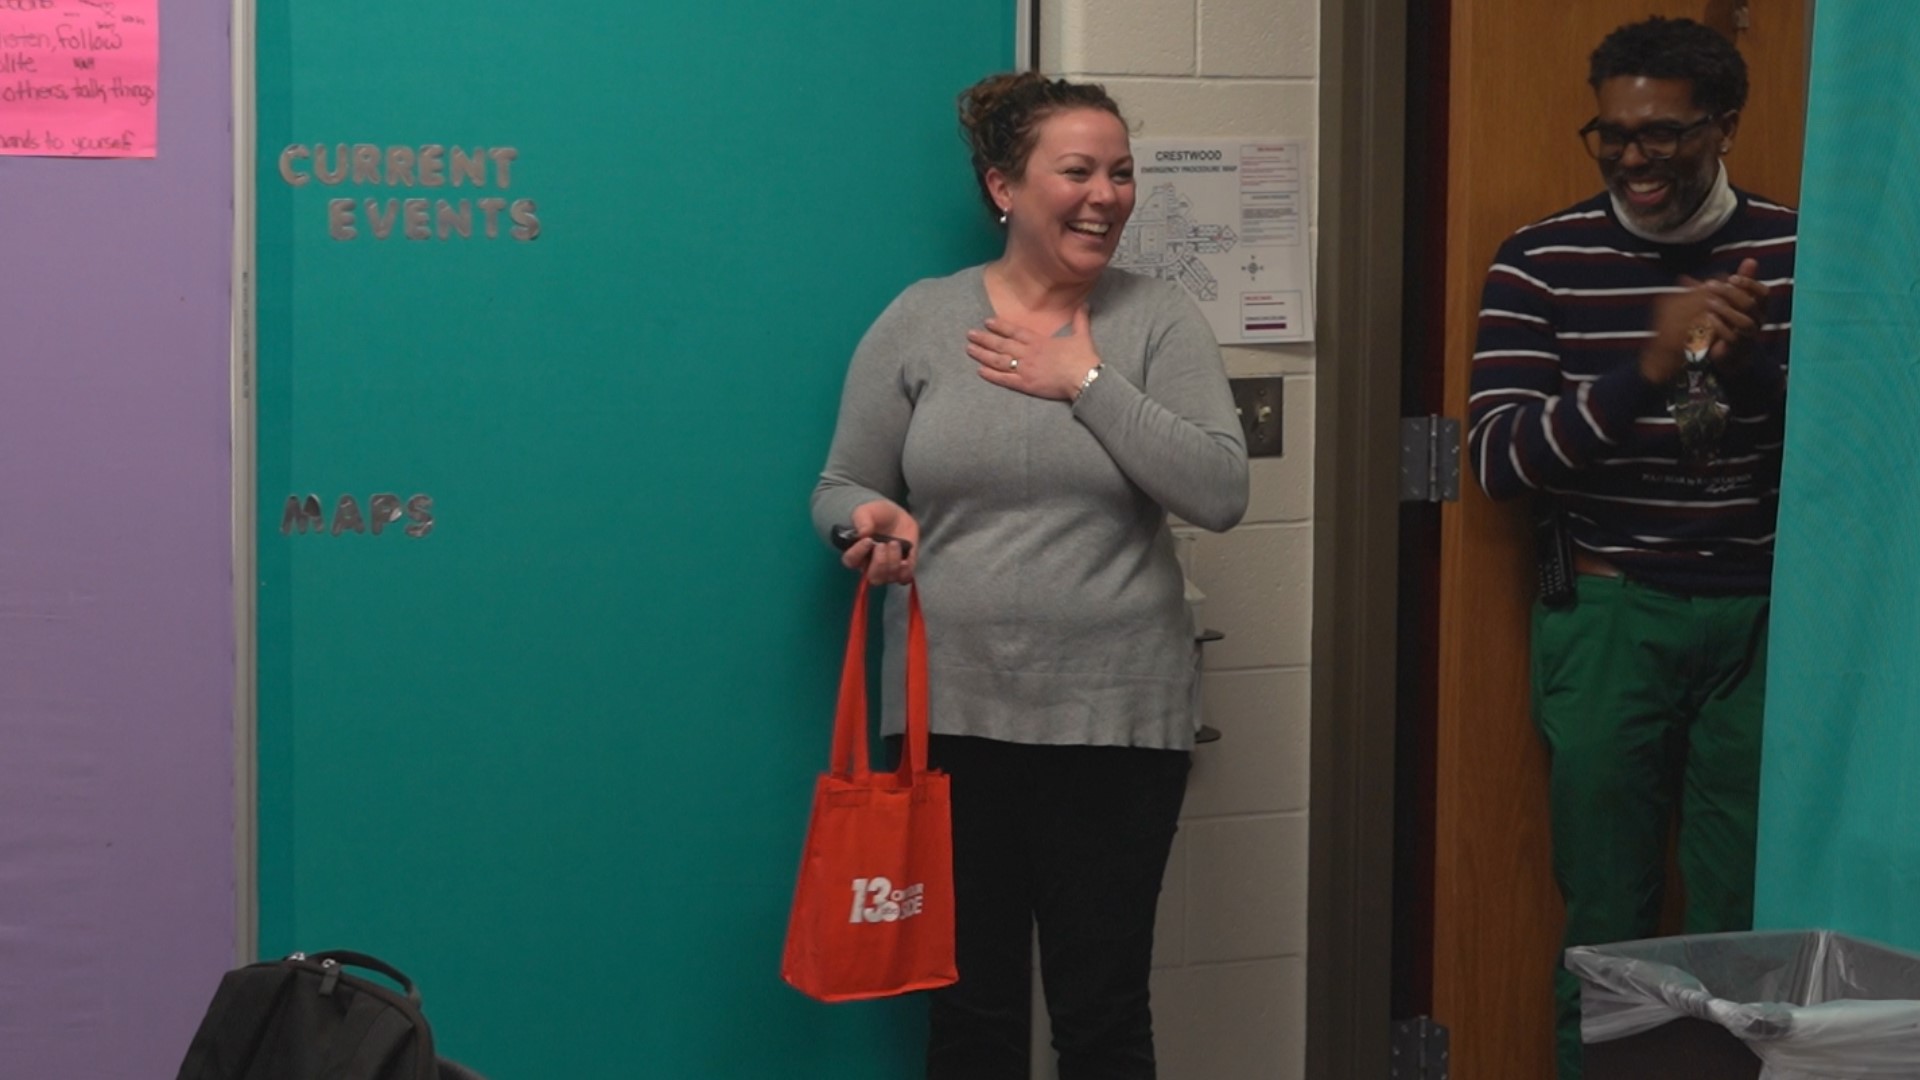 Our latest Teacher of the Week surprise was at Crestwood Middle School, and this fourth-generation teacher had no idea what she was walking into.